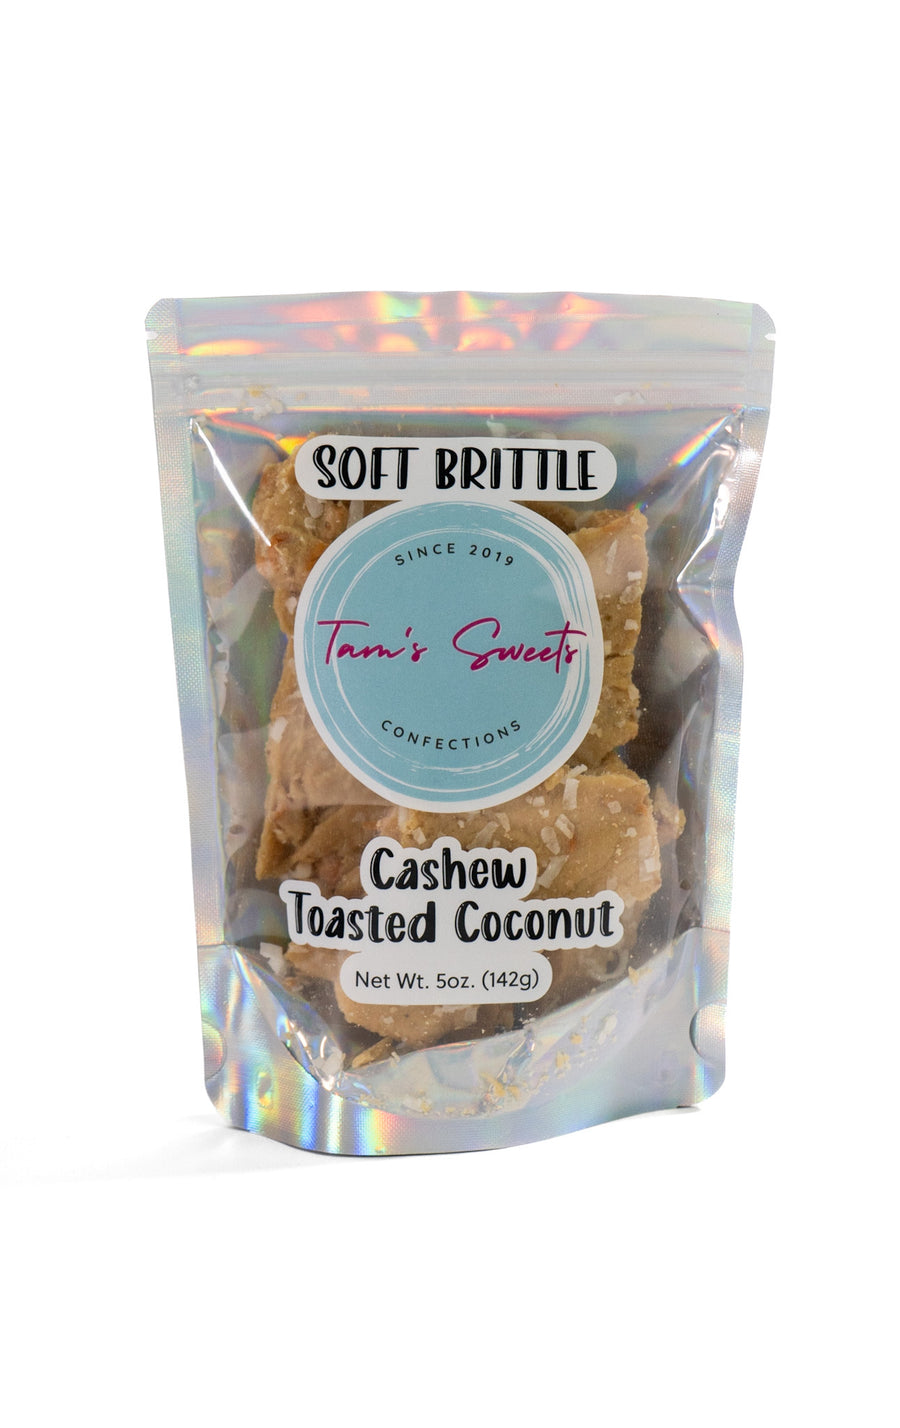 Cashew Coconut Soft Brittle by Tam's Sweets